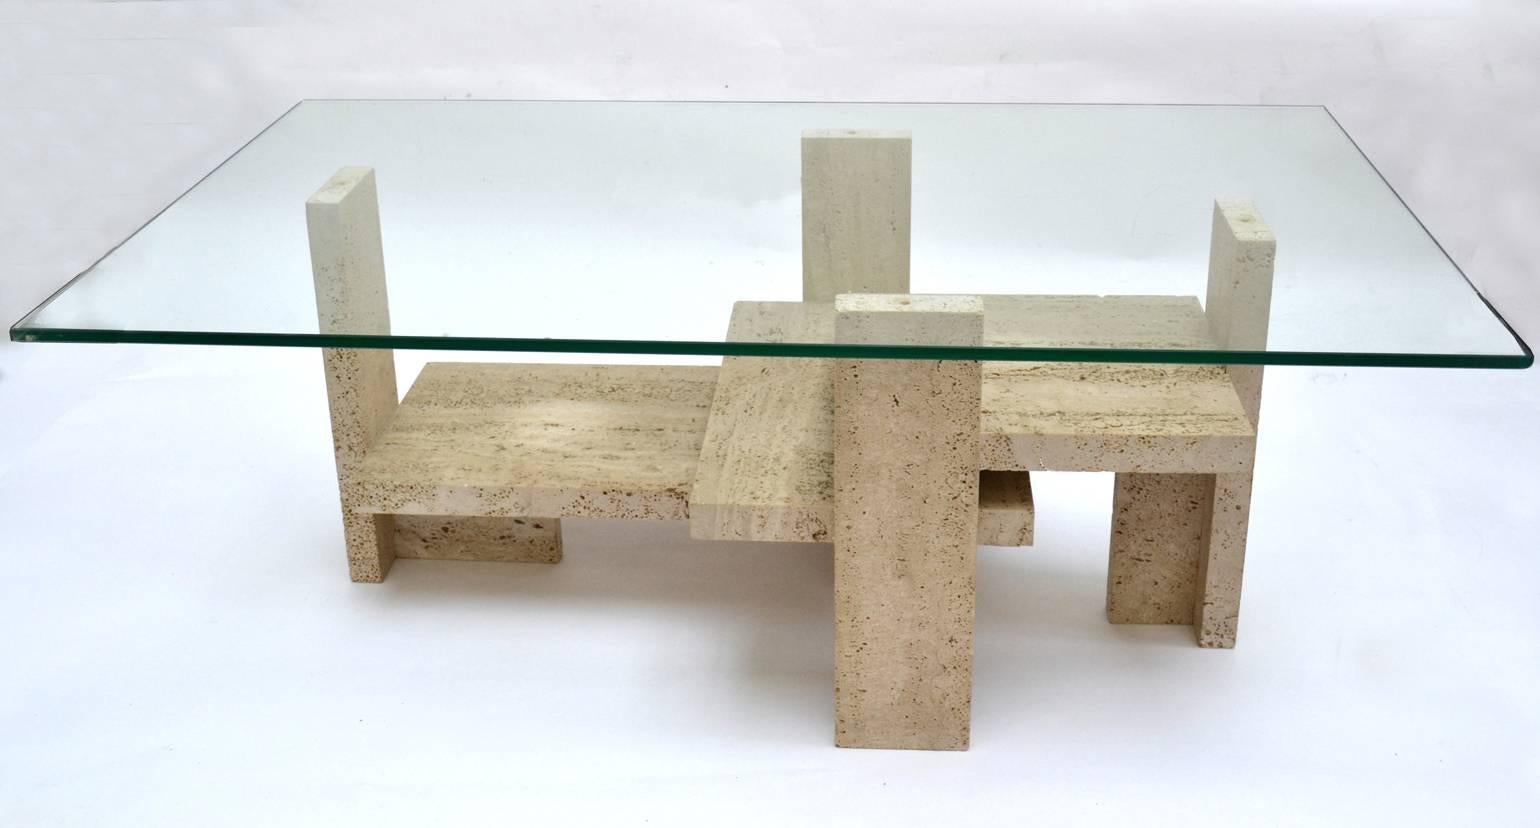 Hand-Crafted 1970's Sculptural Travertine Coffee Tabl by Willy Ballez